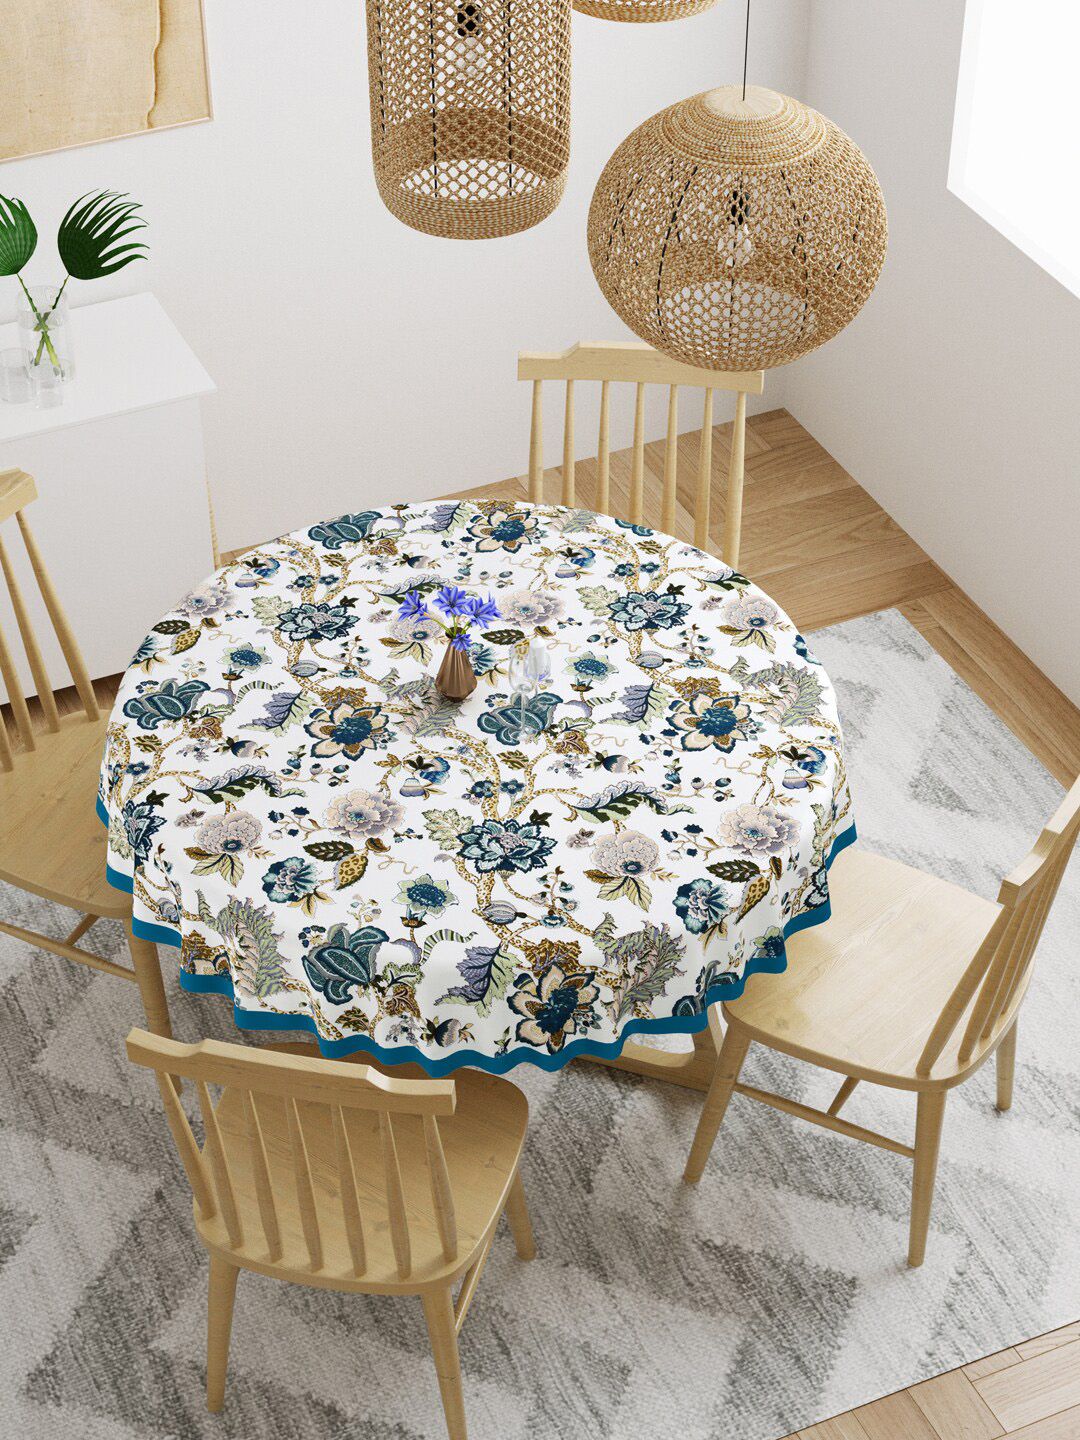 Gulaab Jaipur White & Teal Floral Printed 6-Seater Cotton Table Cover Price in India